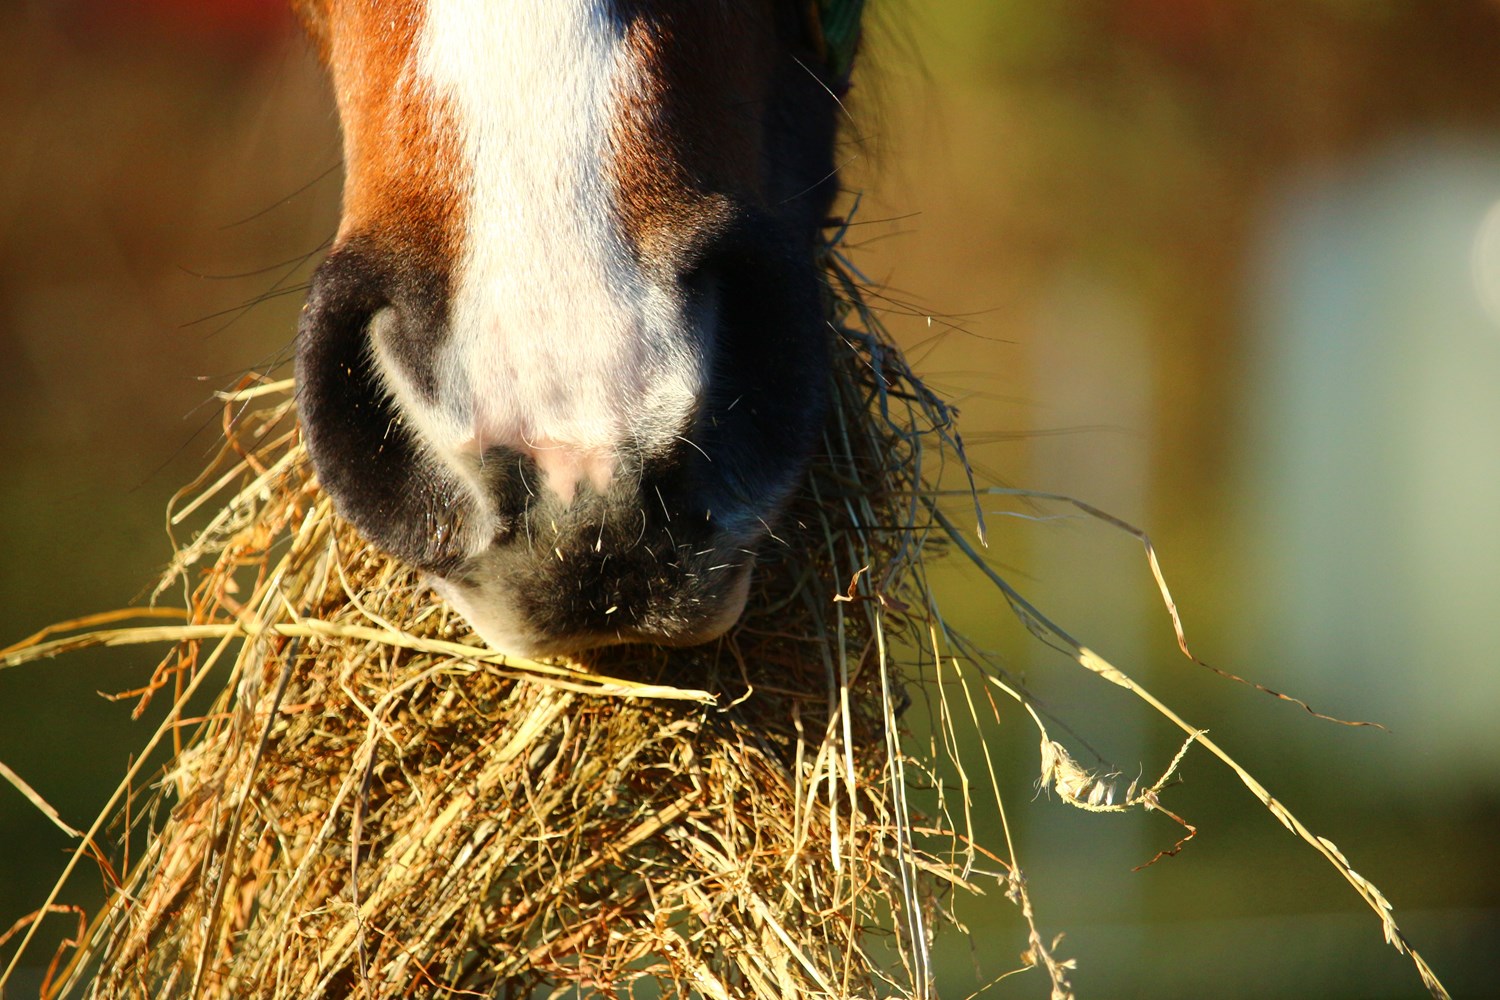 Why Does My Horse Dunk His Hay?